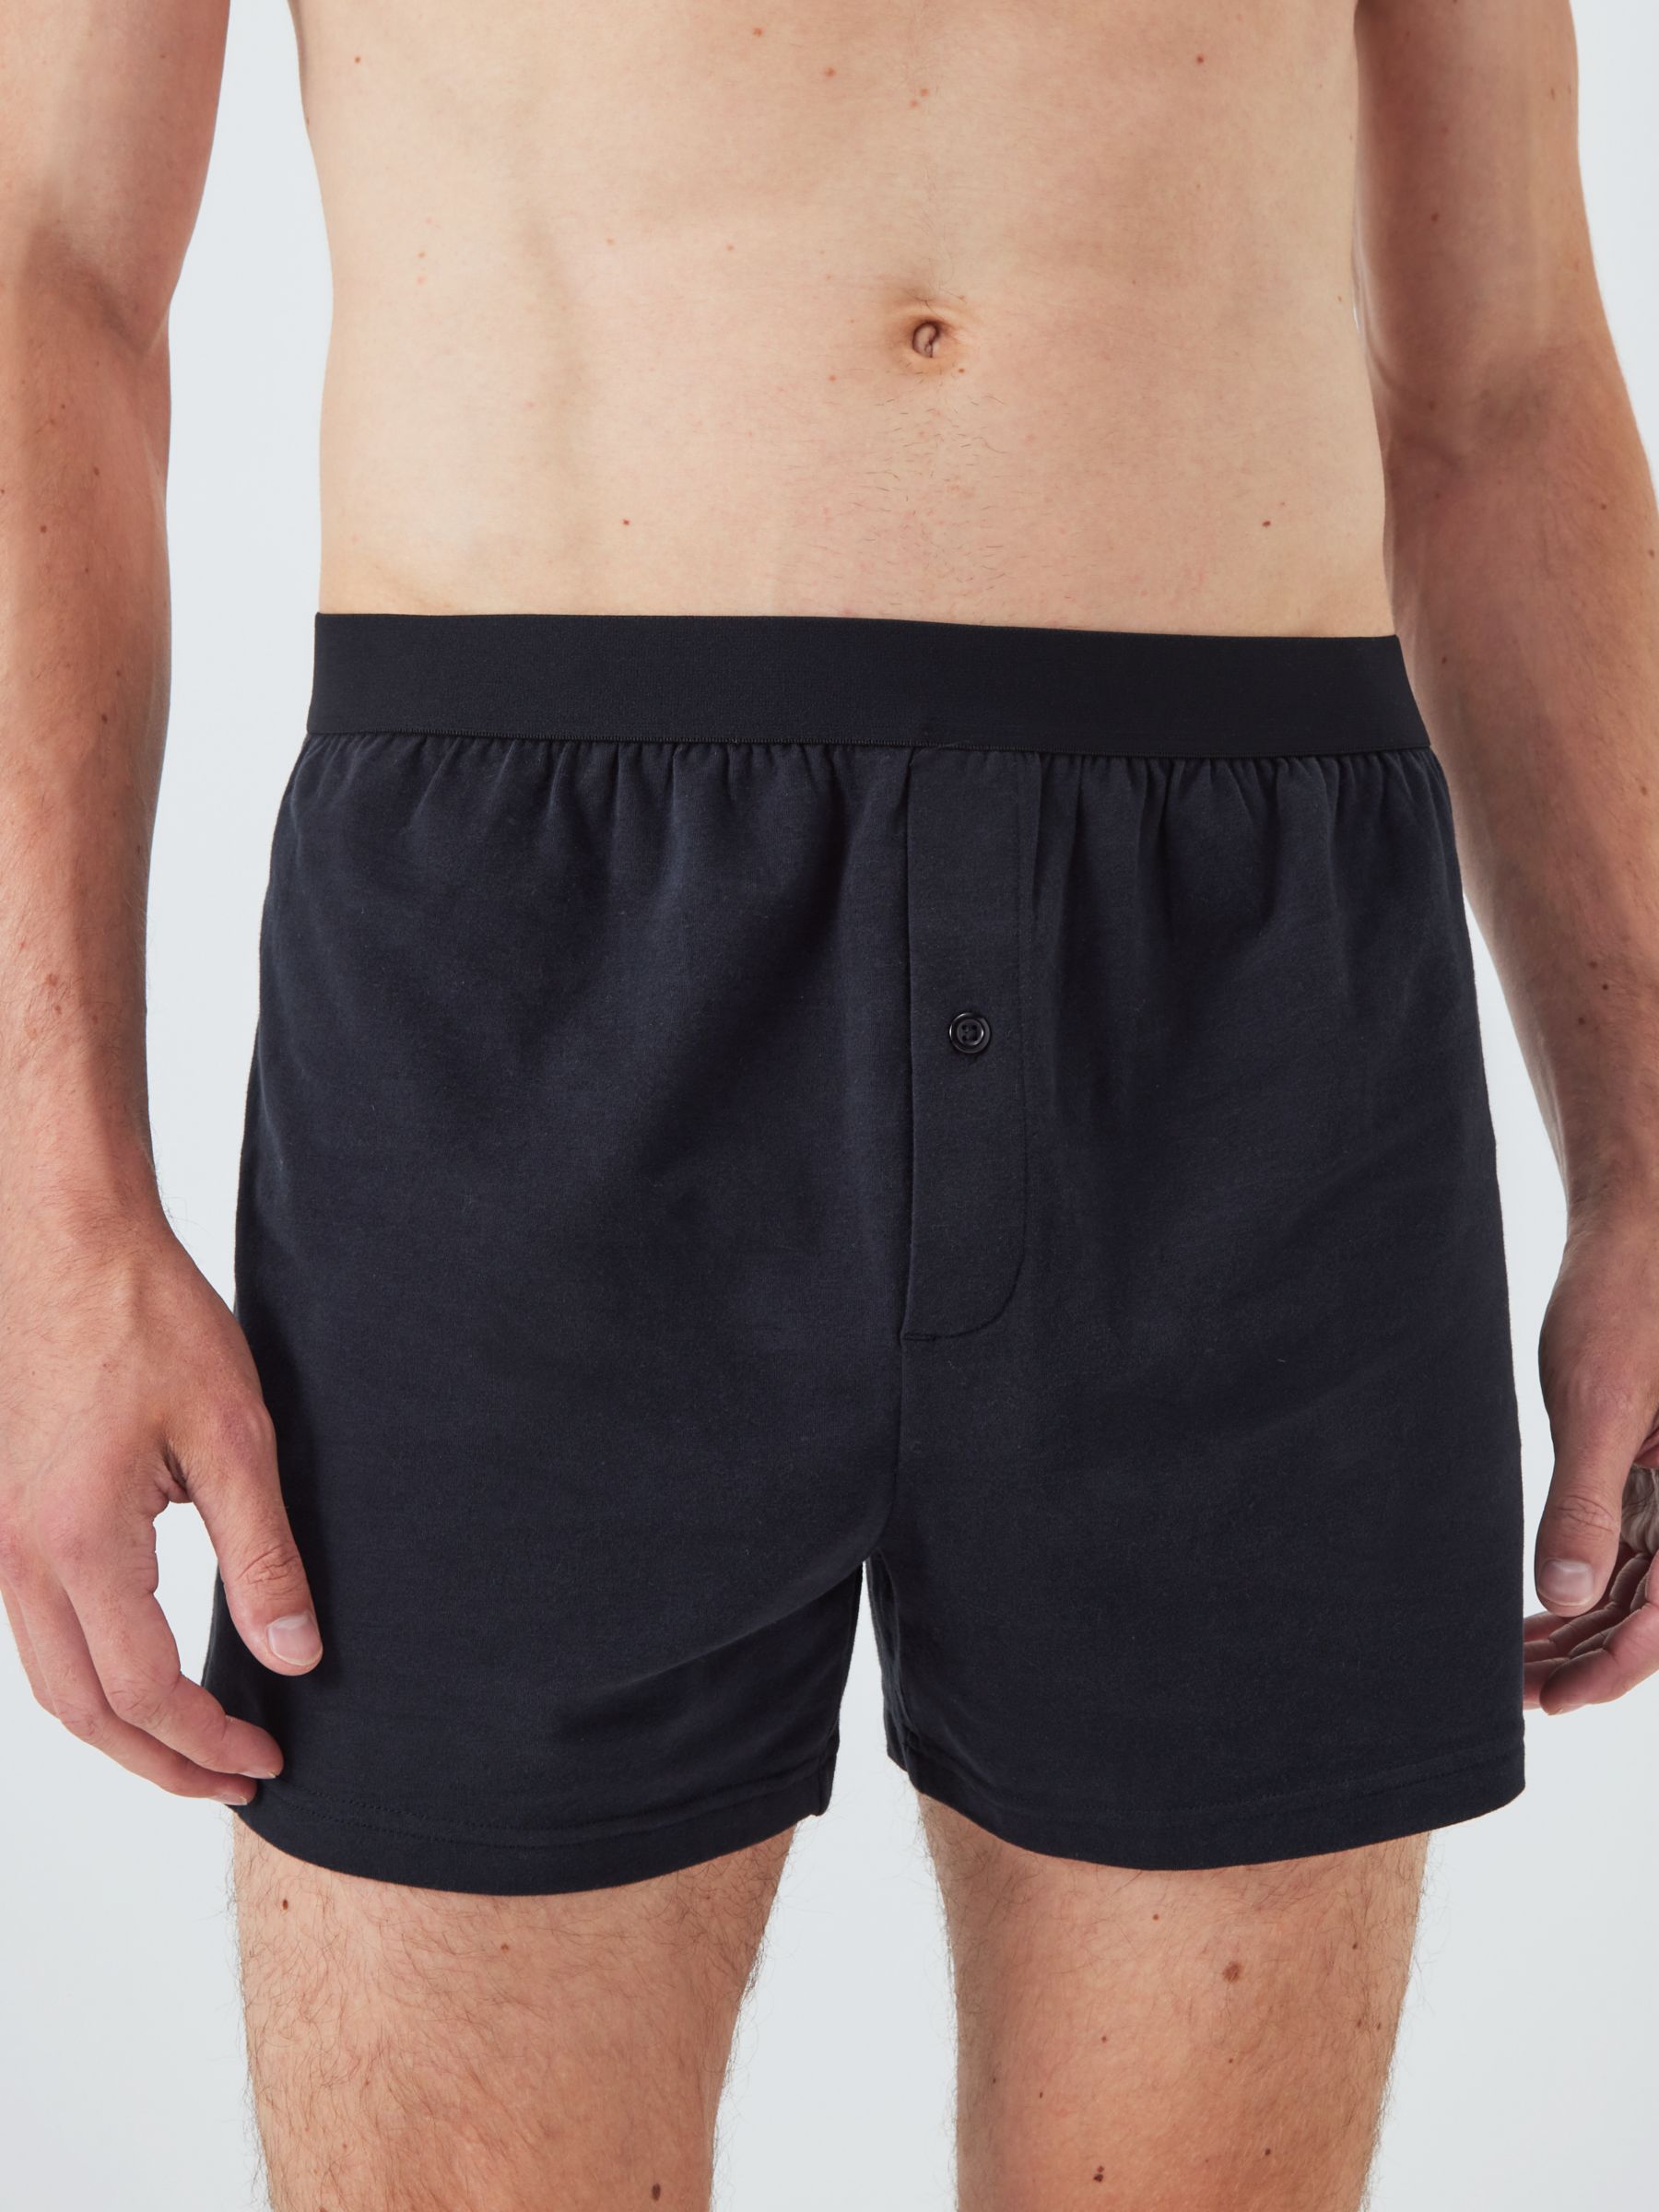 John Lewis ANYDAY Jersey Boxers, Pack of 3, Black, S